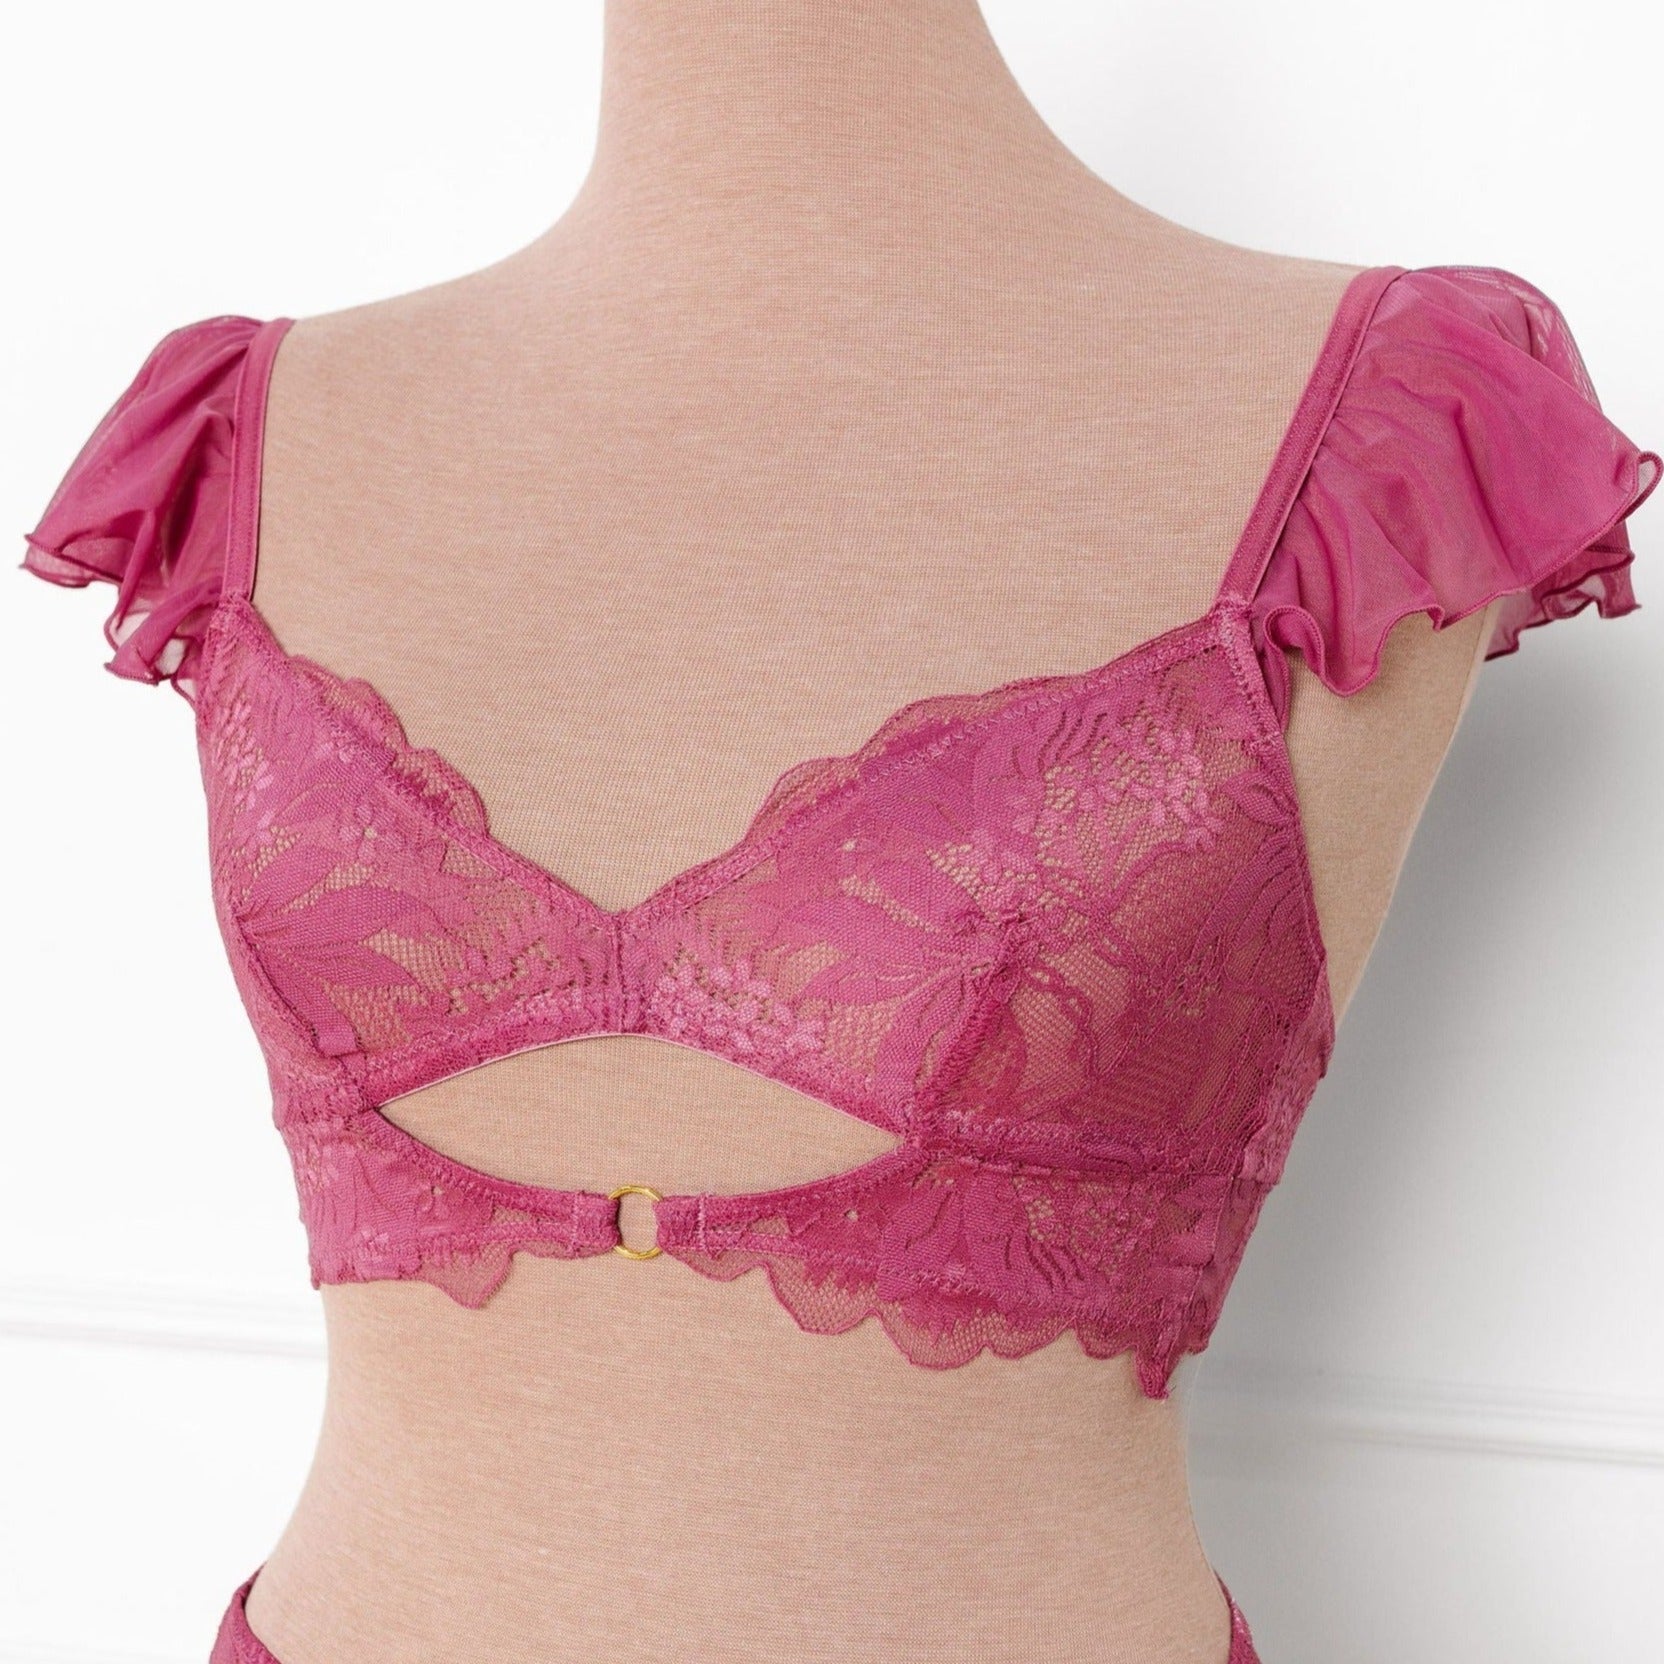 Emily's pink floral lace trim bra on Emily in Paris